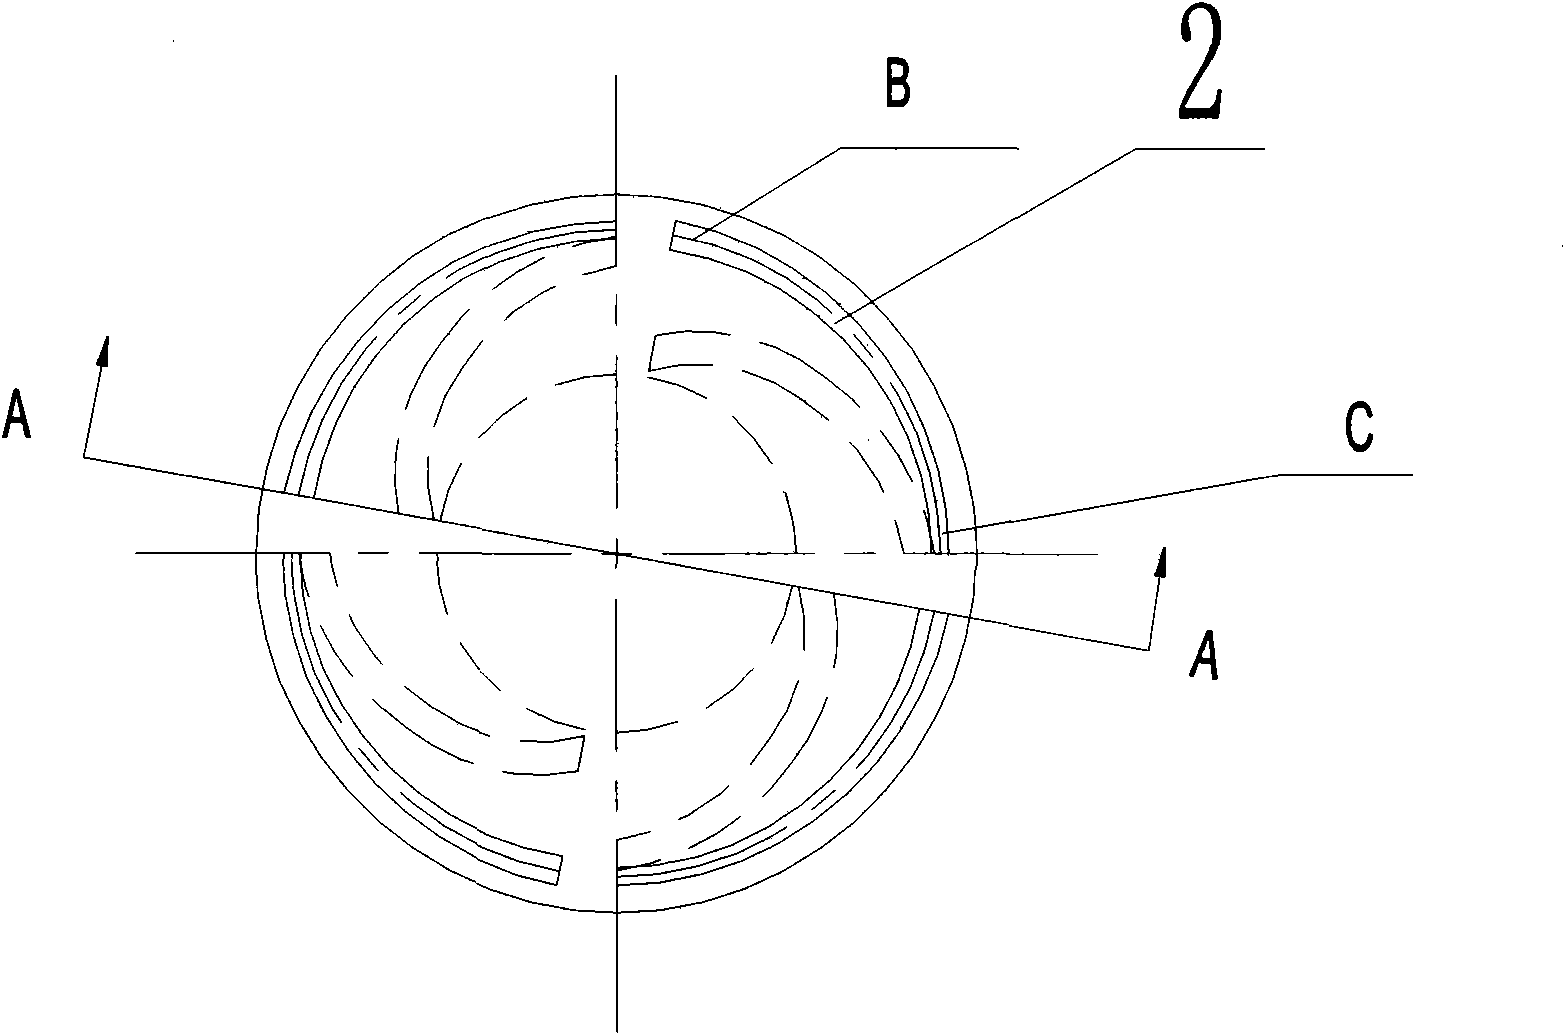 Fire-fighting sprinkler head with circular-arc nozzle